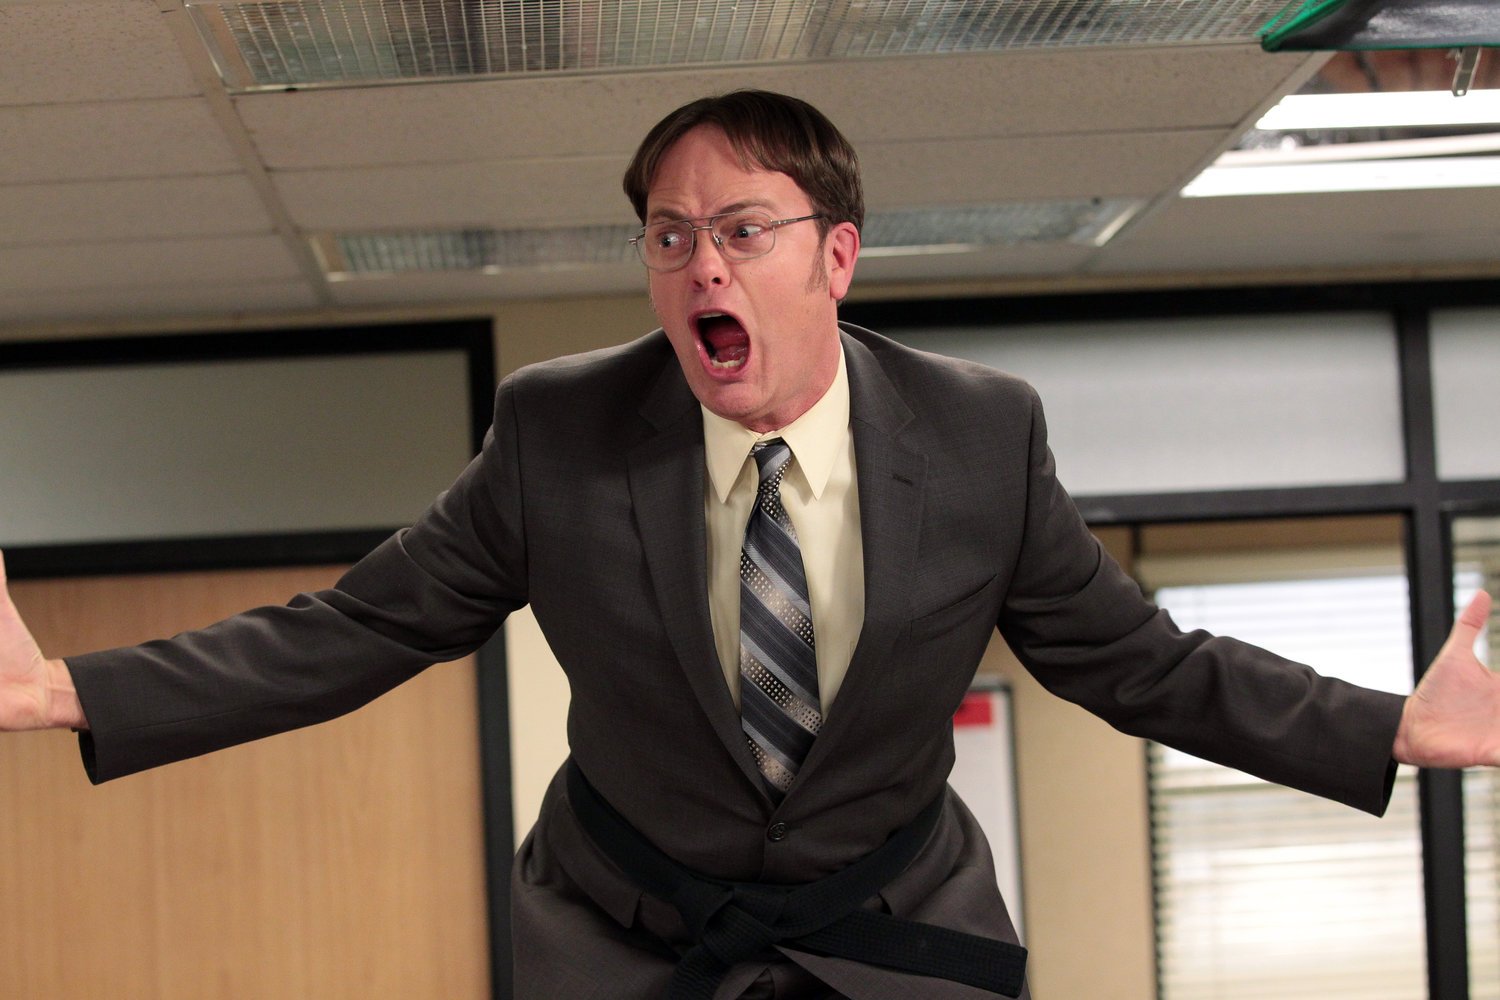 Dwight Schrute on 'The Office' | Chris Haston/NBCU Photo Bank/NBCUniversal via Getty Images via Getty Images